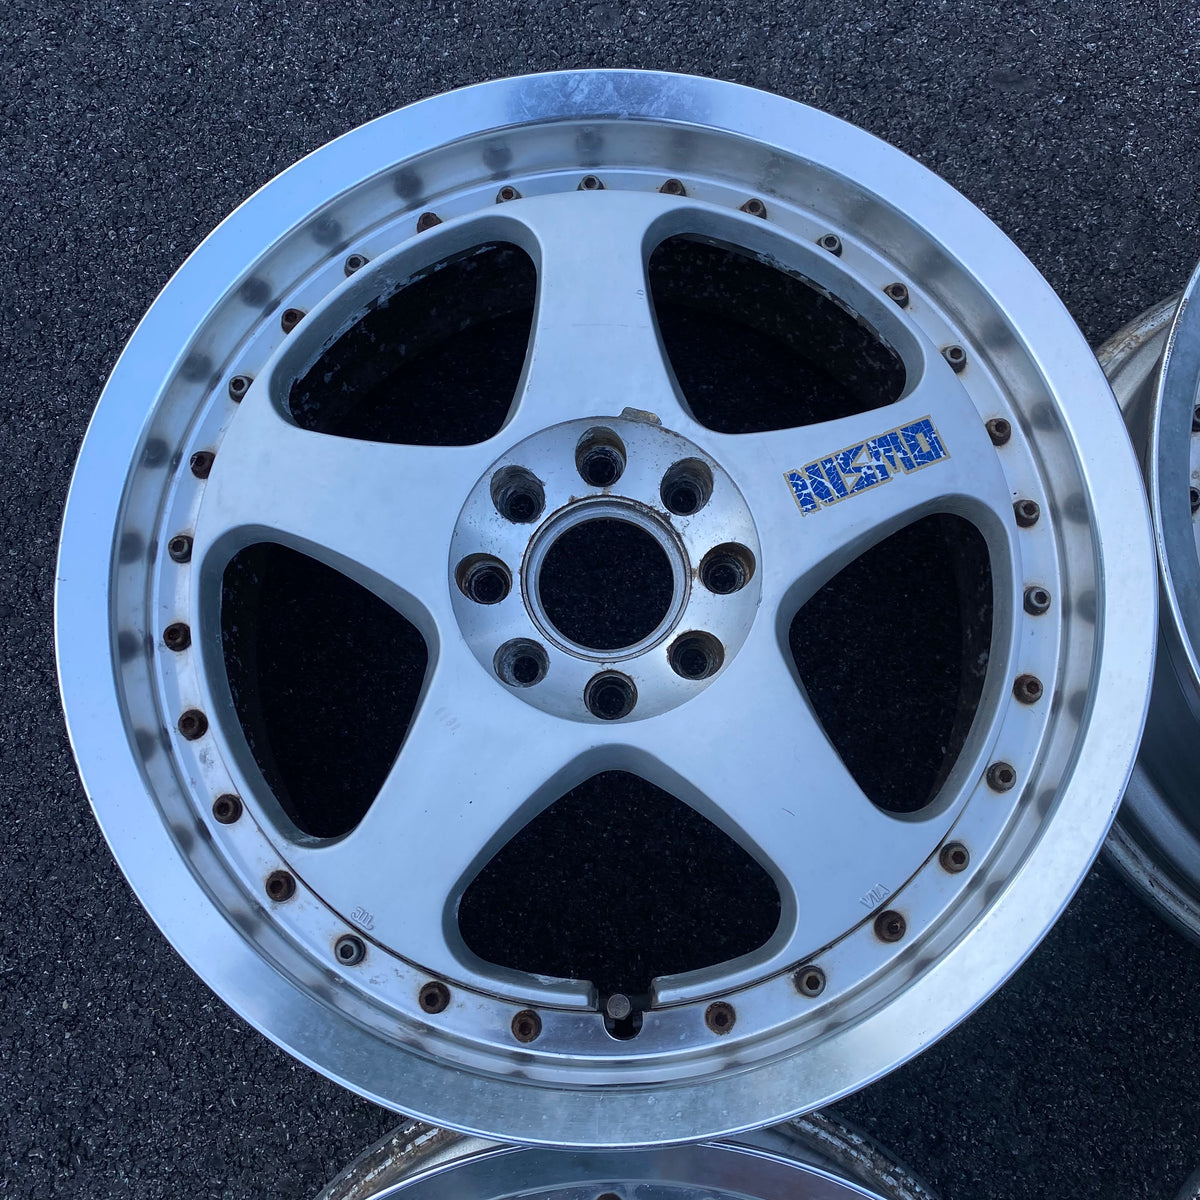 Rays Nismo LMGT-2 4x114.3 17x7 +29 17x8 +38 – Parts From Japan